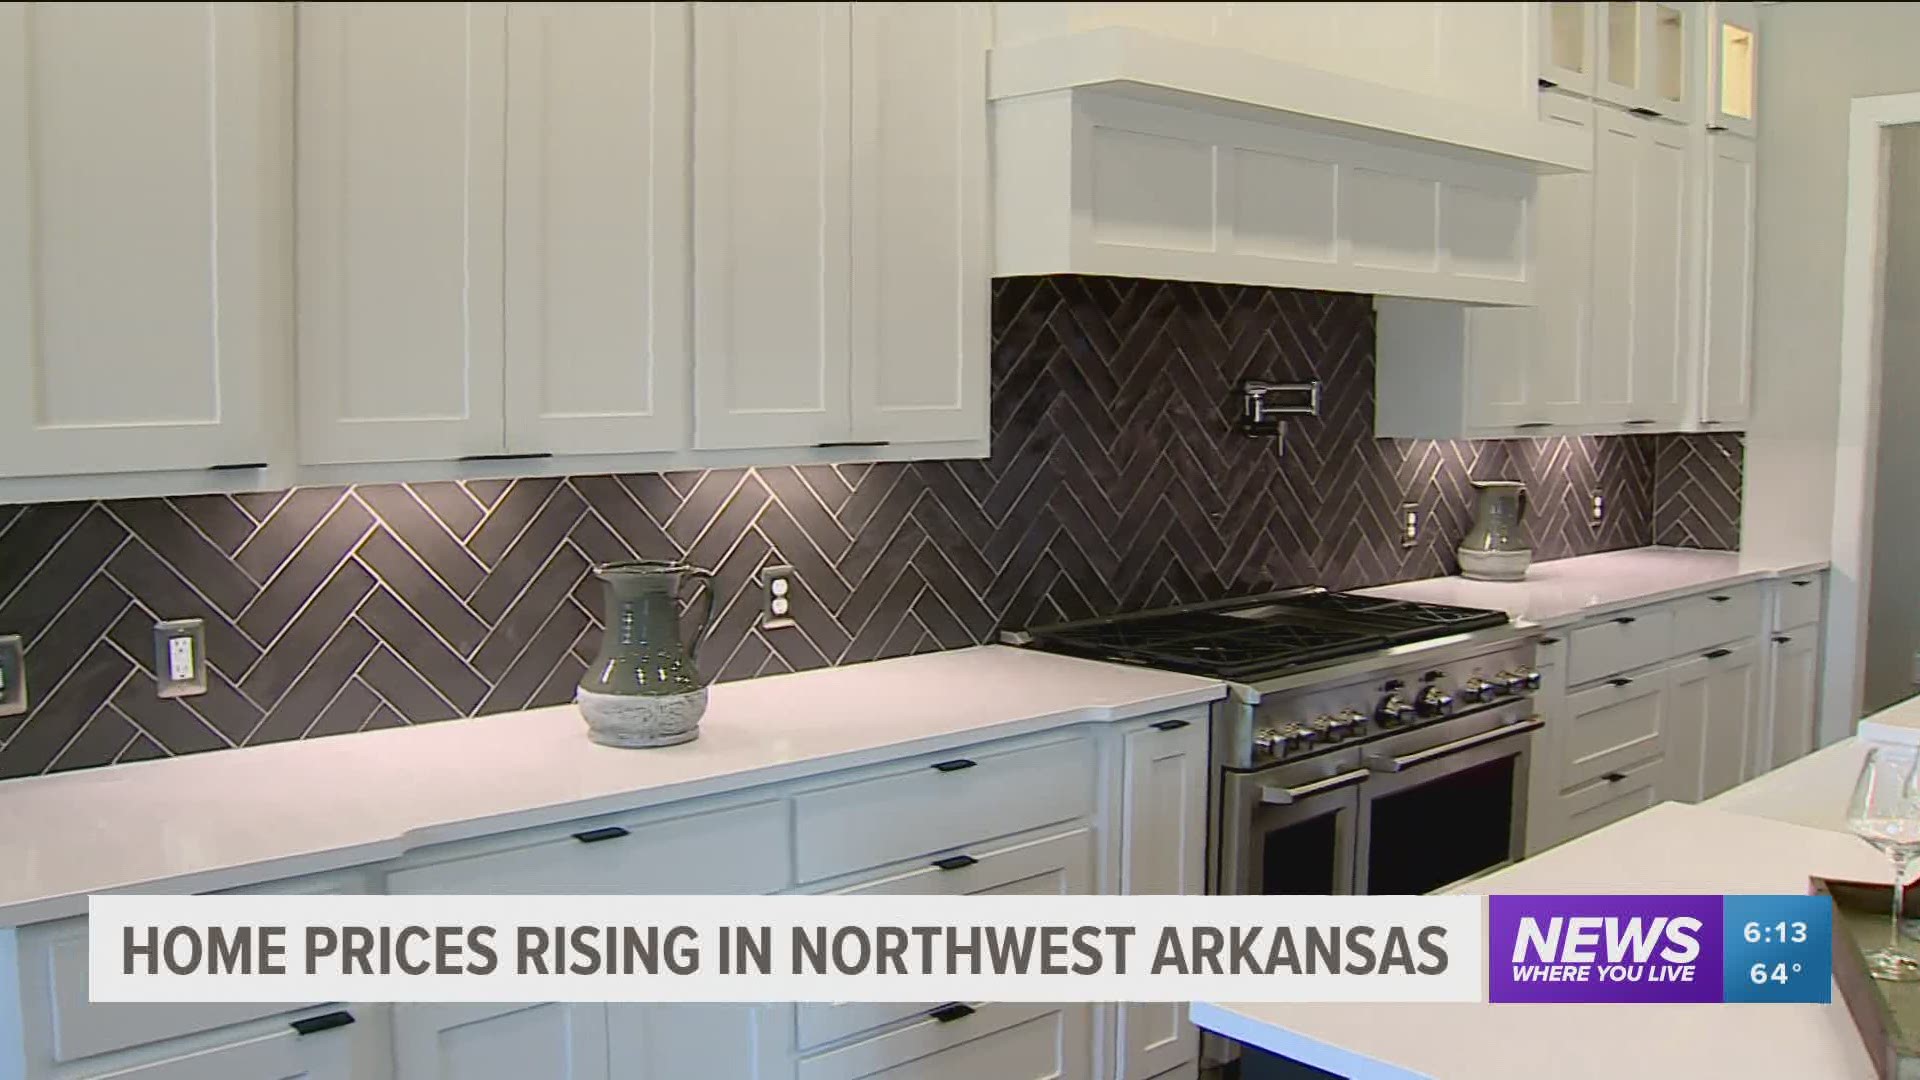 Home prices rising in NWA